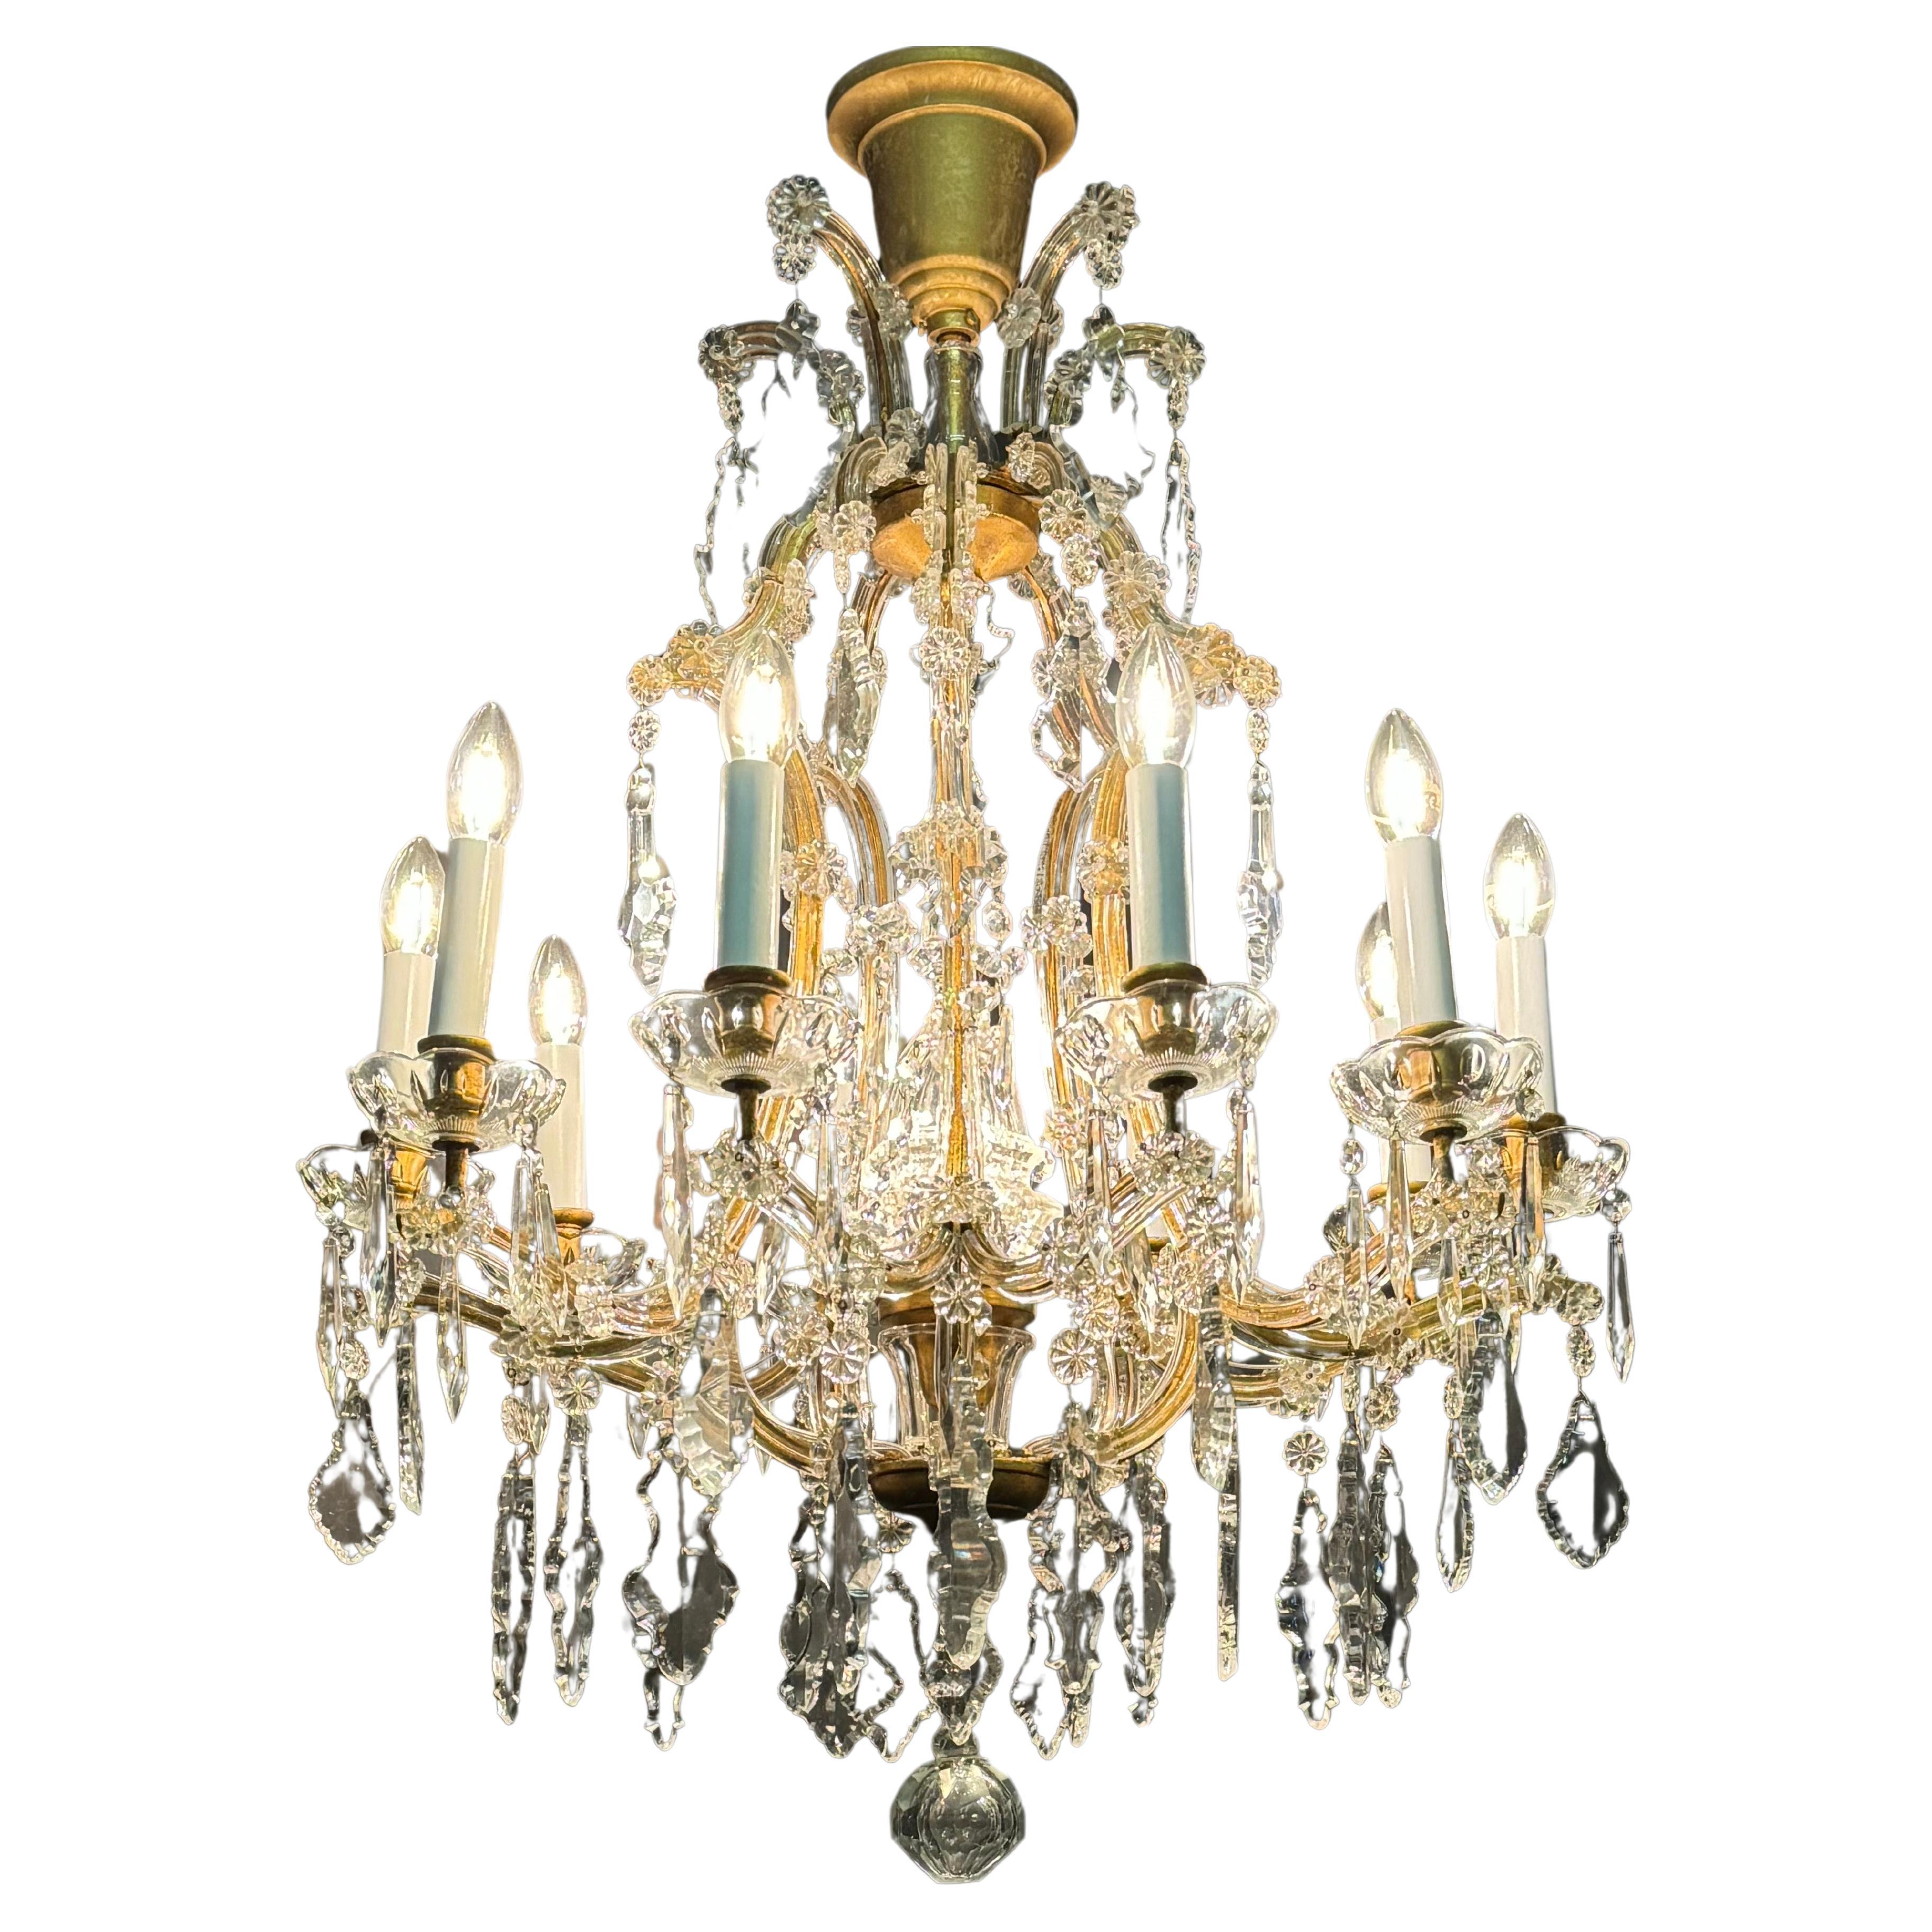 Maria Theresia Gilt Iron Crystal and Chandelier by J. & L. Lobmeyr, ca. 1950s